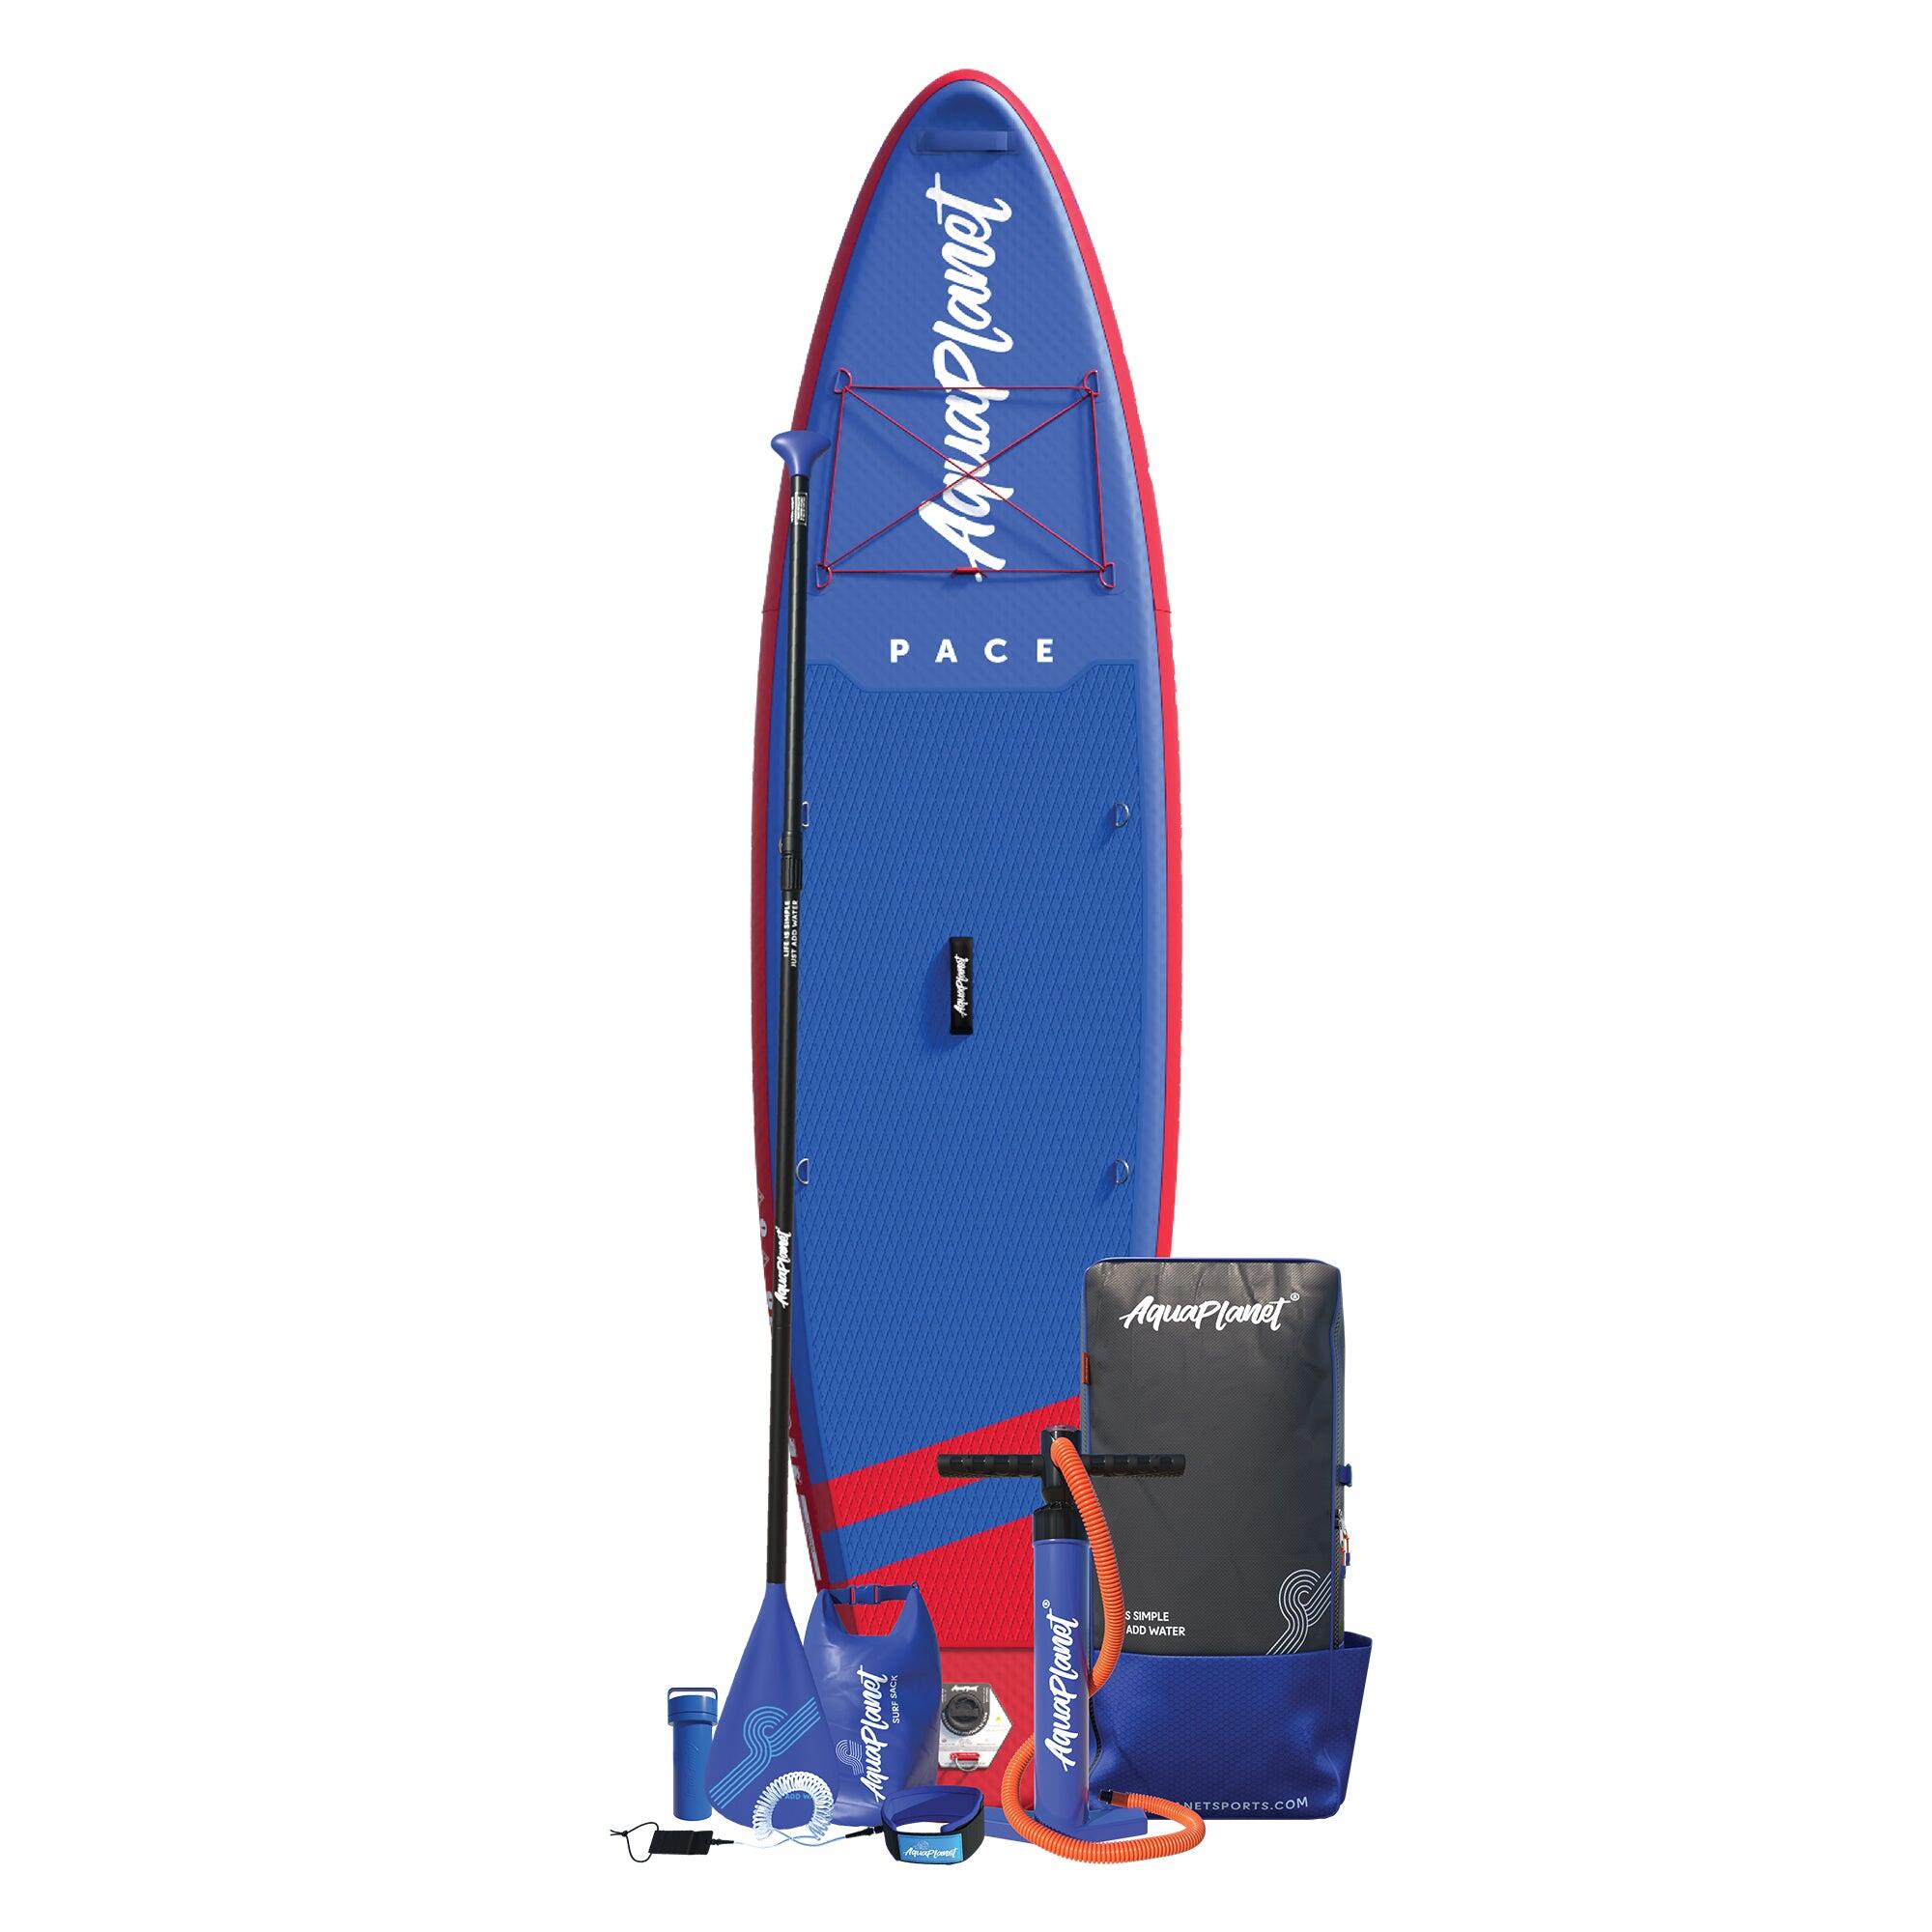 Aquaplanet PACE 10'6 Inflatable Stand Up Paddle Board Package - Red/Blue 2/6